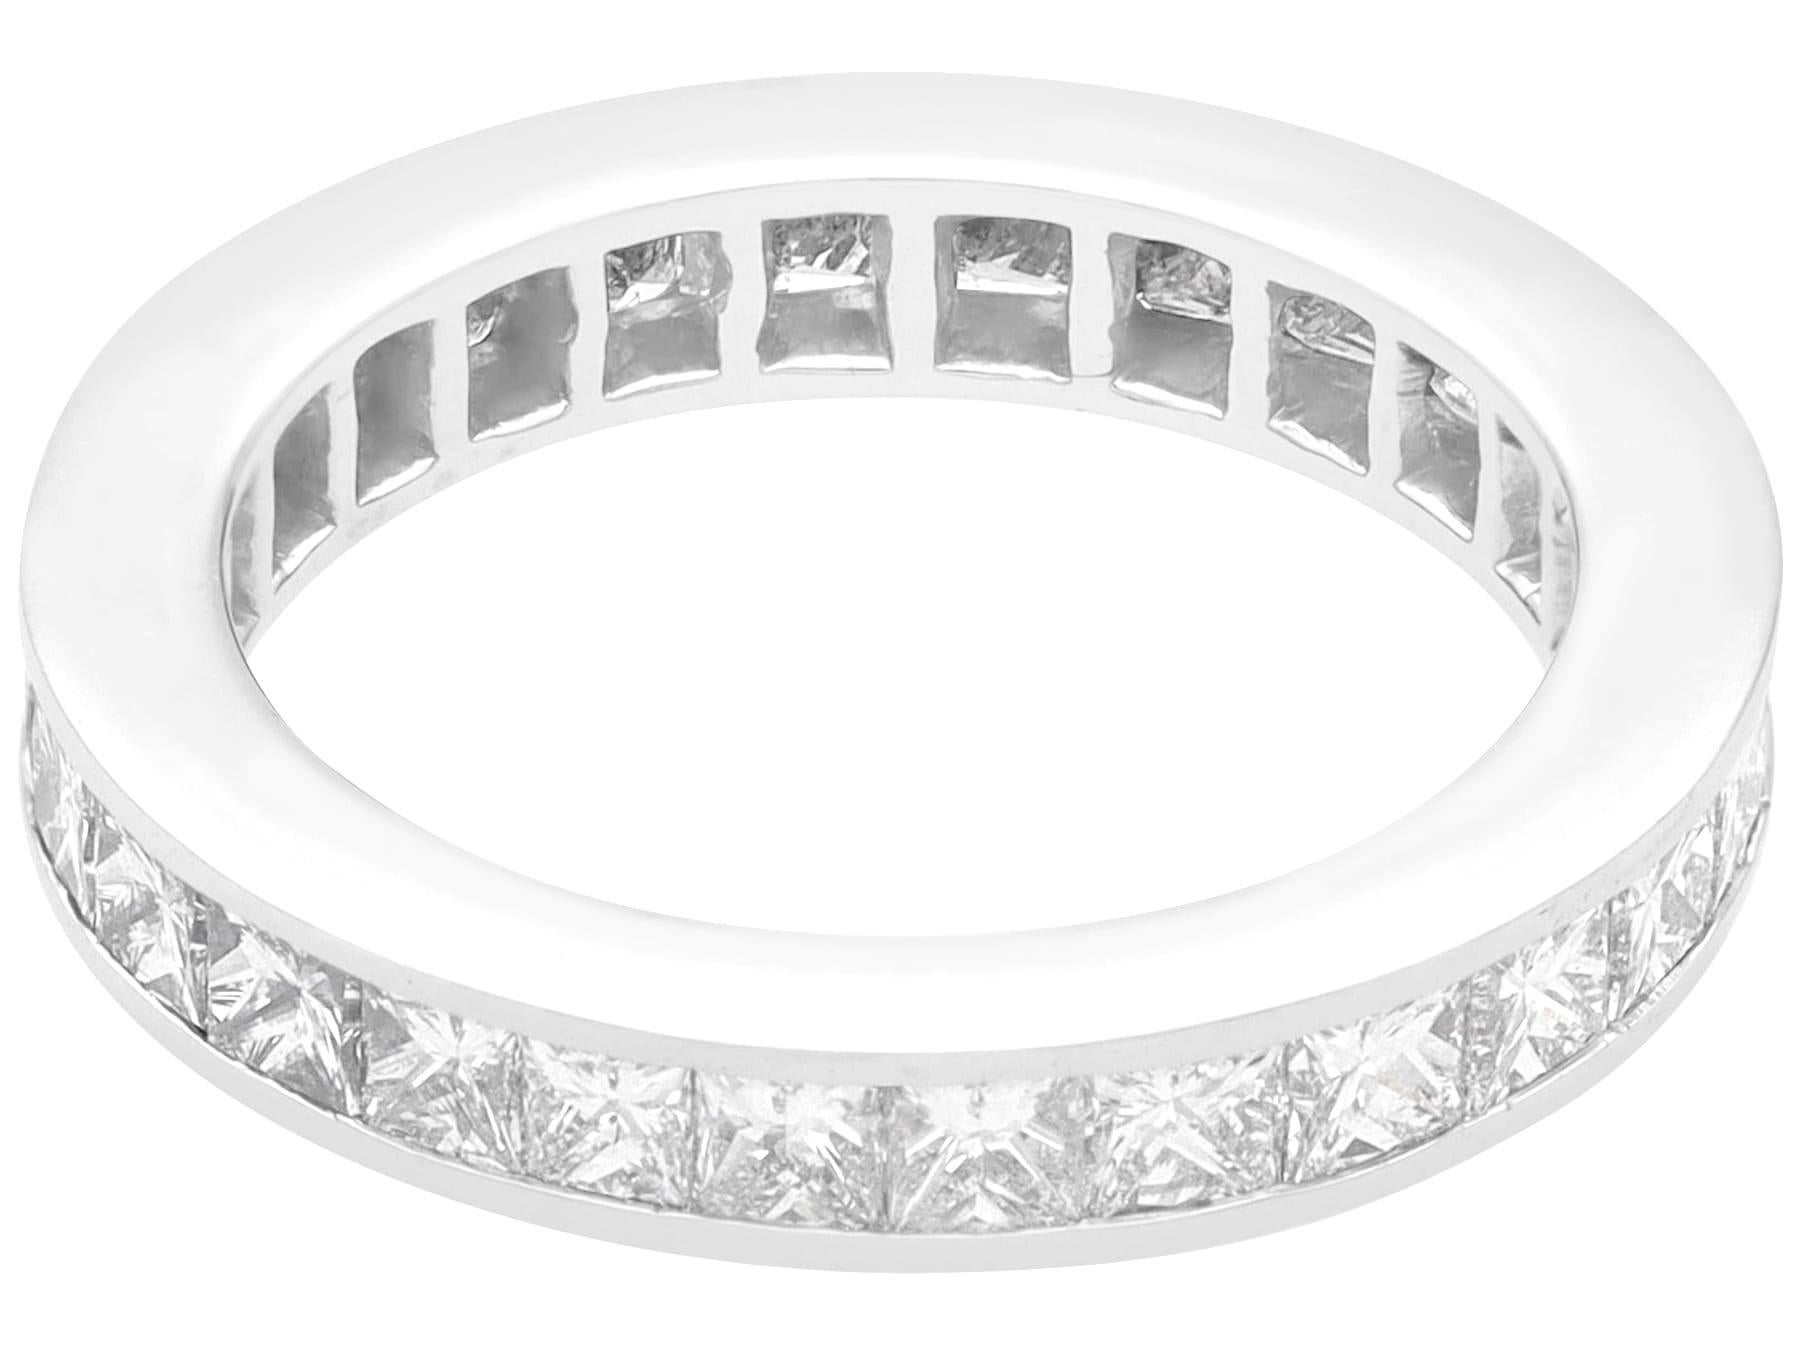 Vintage 1.30 Carat Diamond and Platinum Full Eternity Ring, circa 1980 In Excellent Condition For Sale In Jesmond, Newcastle Upon Tyne